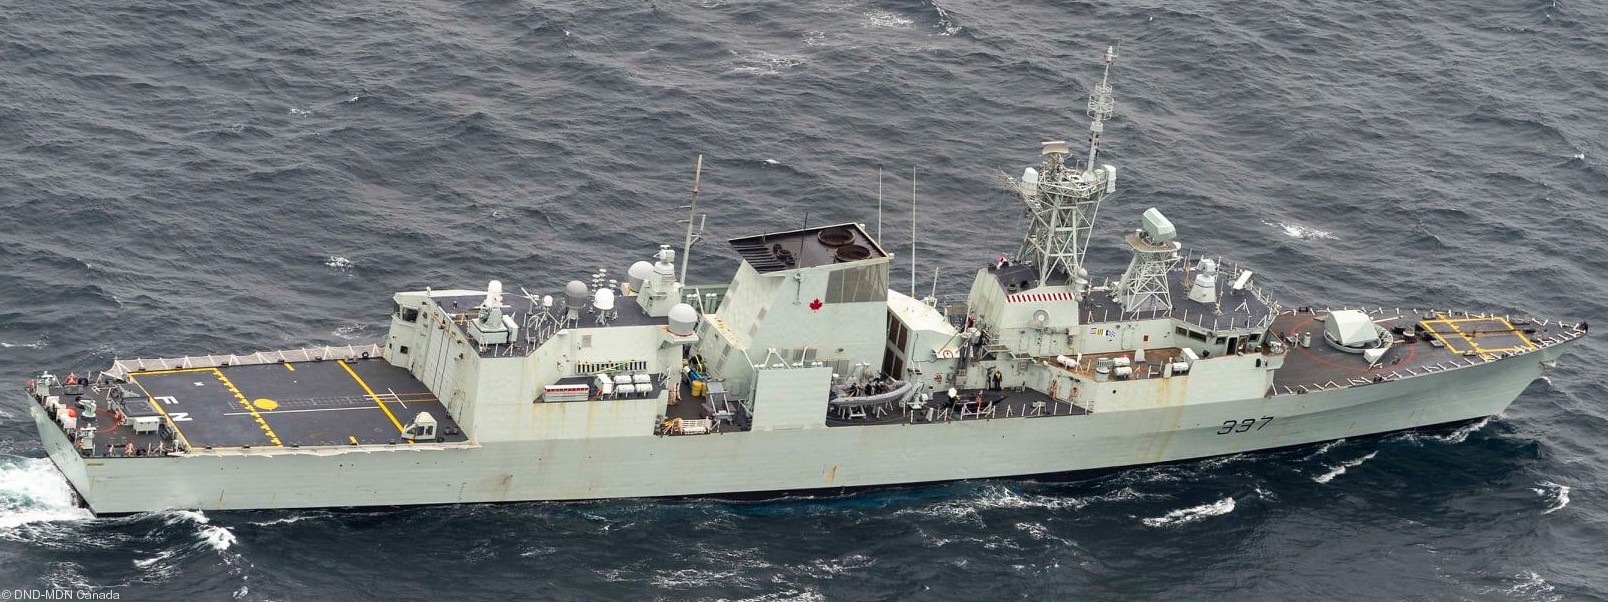 ffh-337 hmcs fredericton halifax class helicopter patrol frigate ncsm royal canadian navy 10